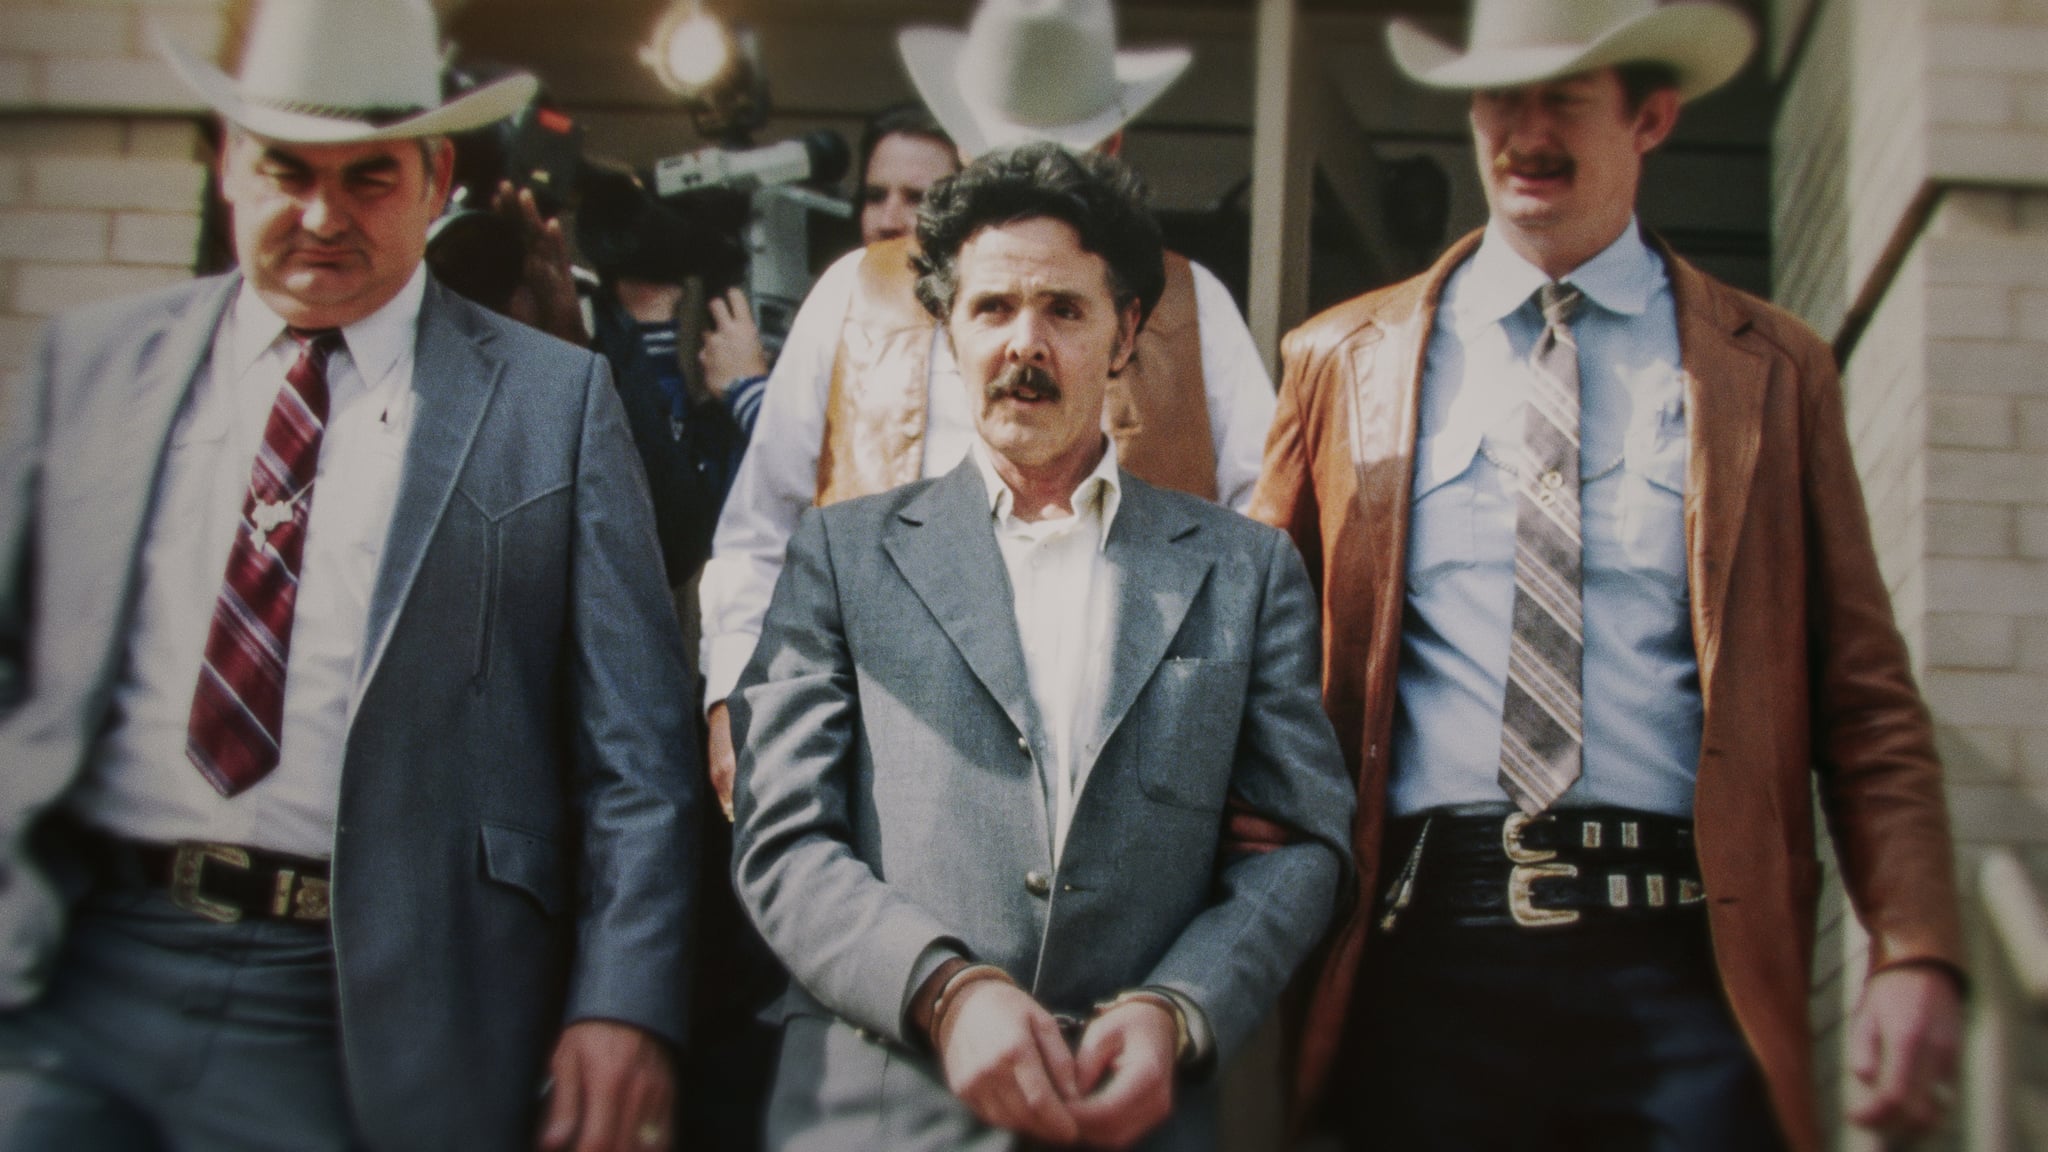 The Confession Killer — Henry Lee Lucas (center) being escorted by Ranger Bob Prince (left) and task force